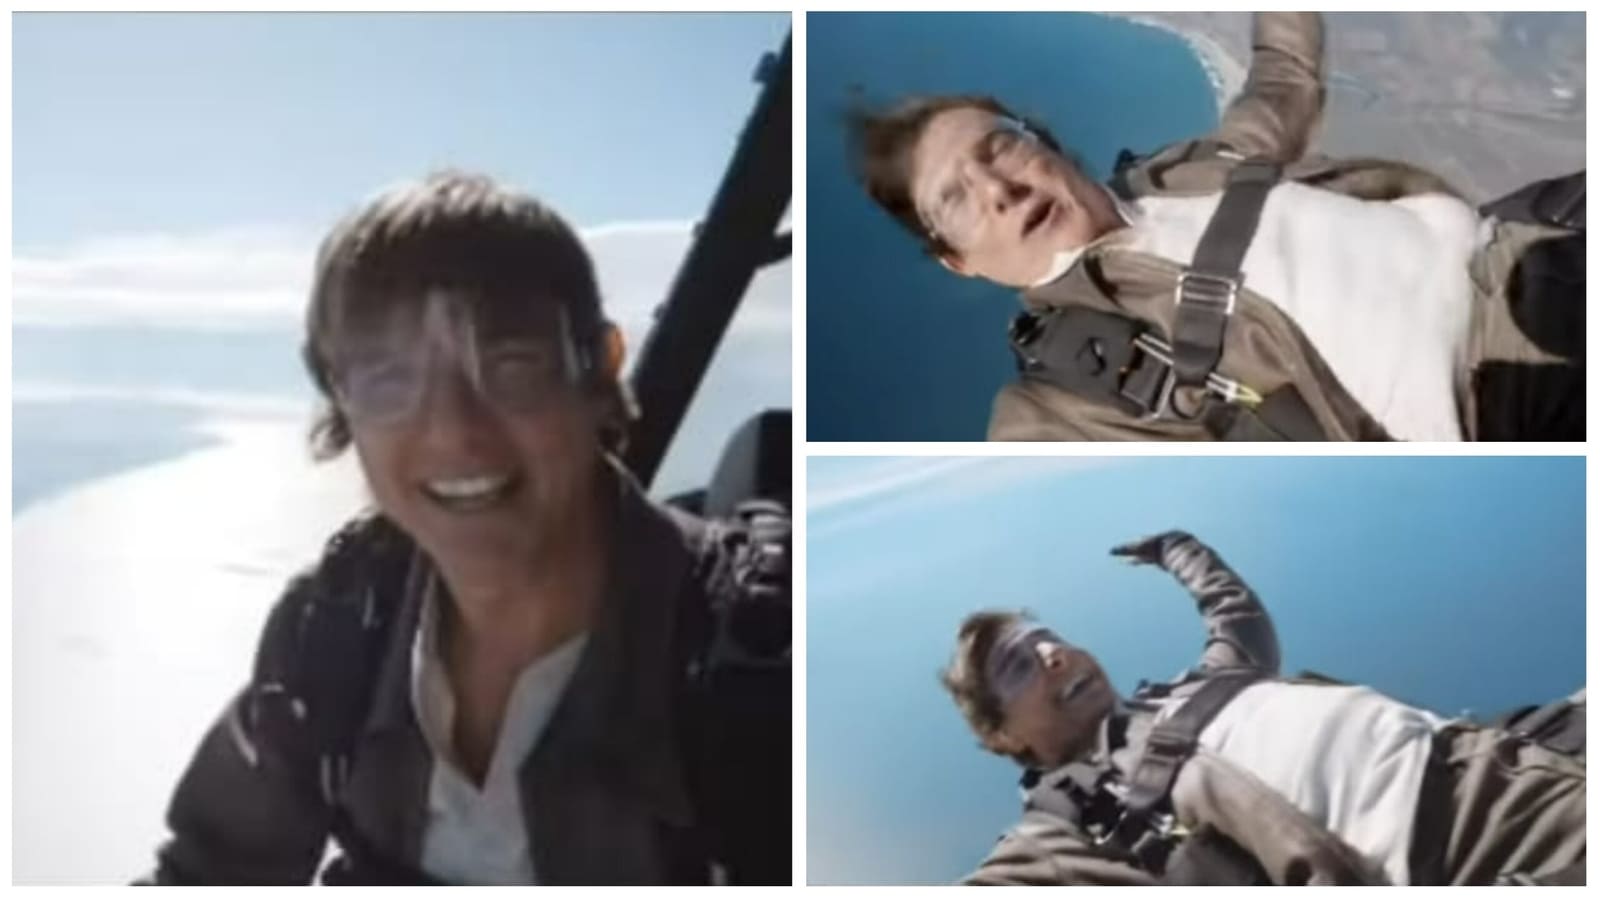 Tom Cruise records message for fans as he jumps off plane in ‘insane’ new video, Twitter says ‘unbelievable’. Watch